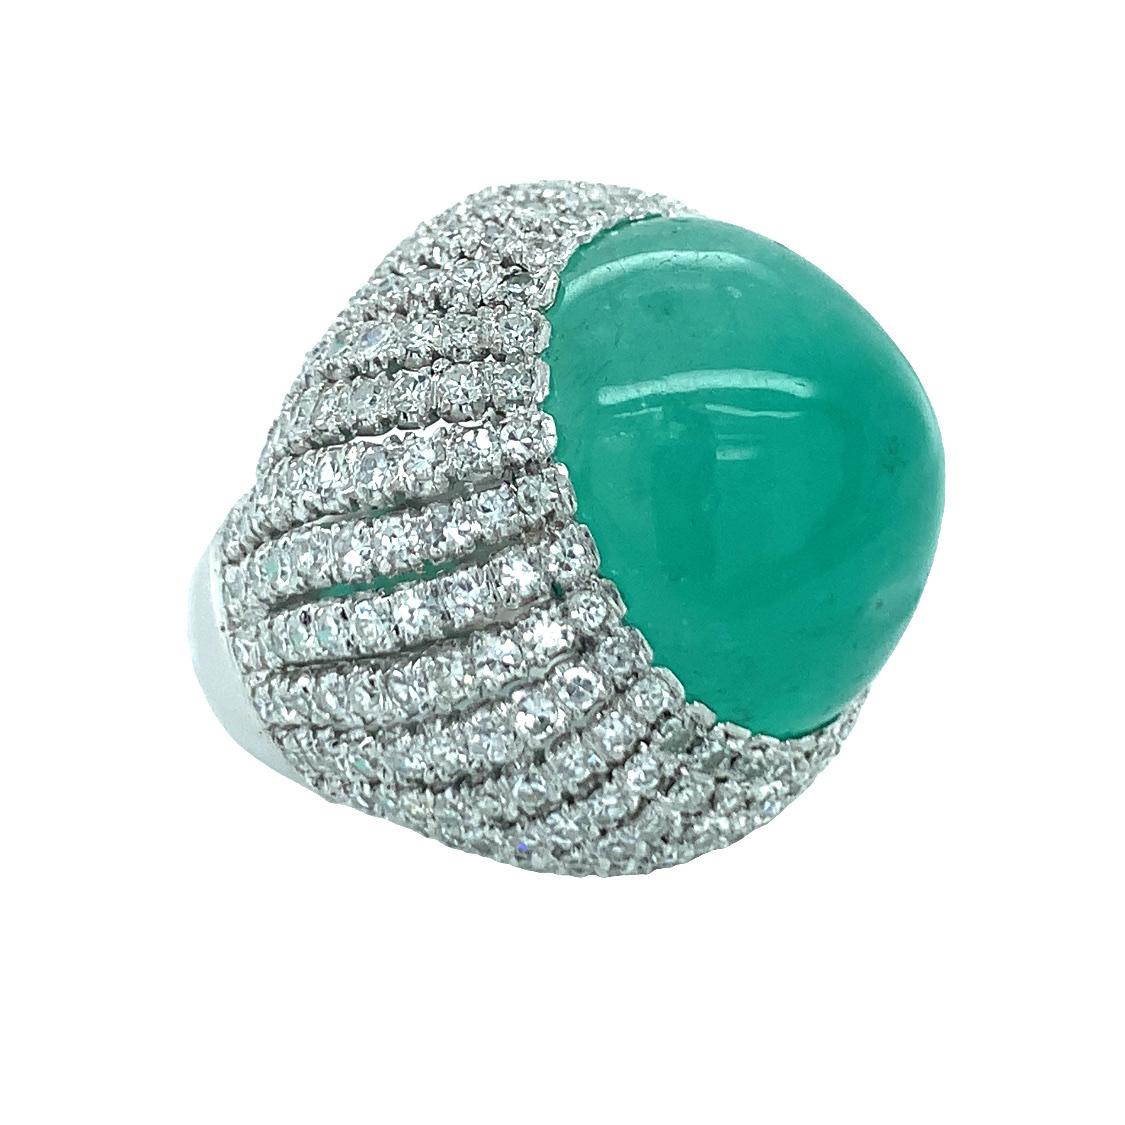 Mid-century emerald and diamond 14K white gold bombe ring centering one oval cabochon, vibrant emerald weighing 30 ct. and measuring 20 x 18 millimeters in size. The ring is futher accented by 252 single round cut diamonds totaling 3.78 ct. with H-I